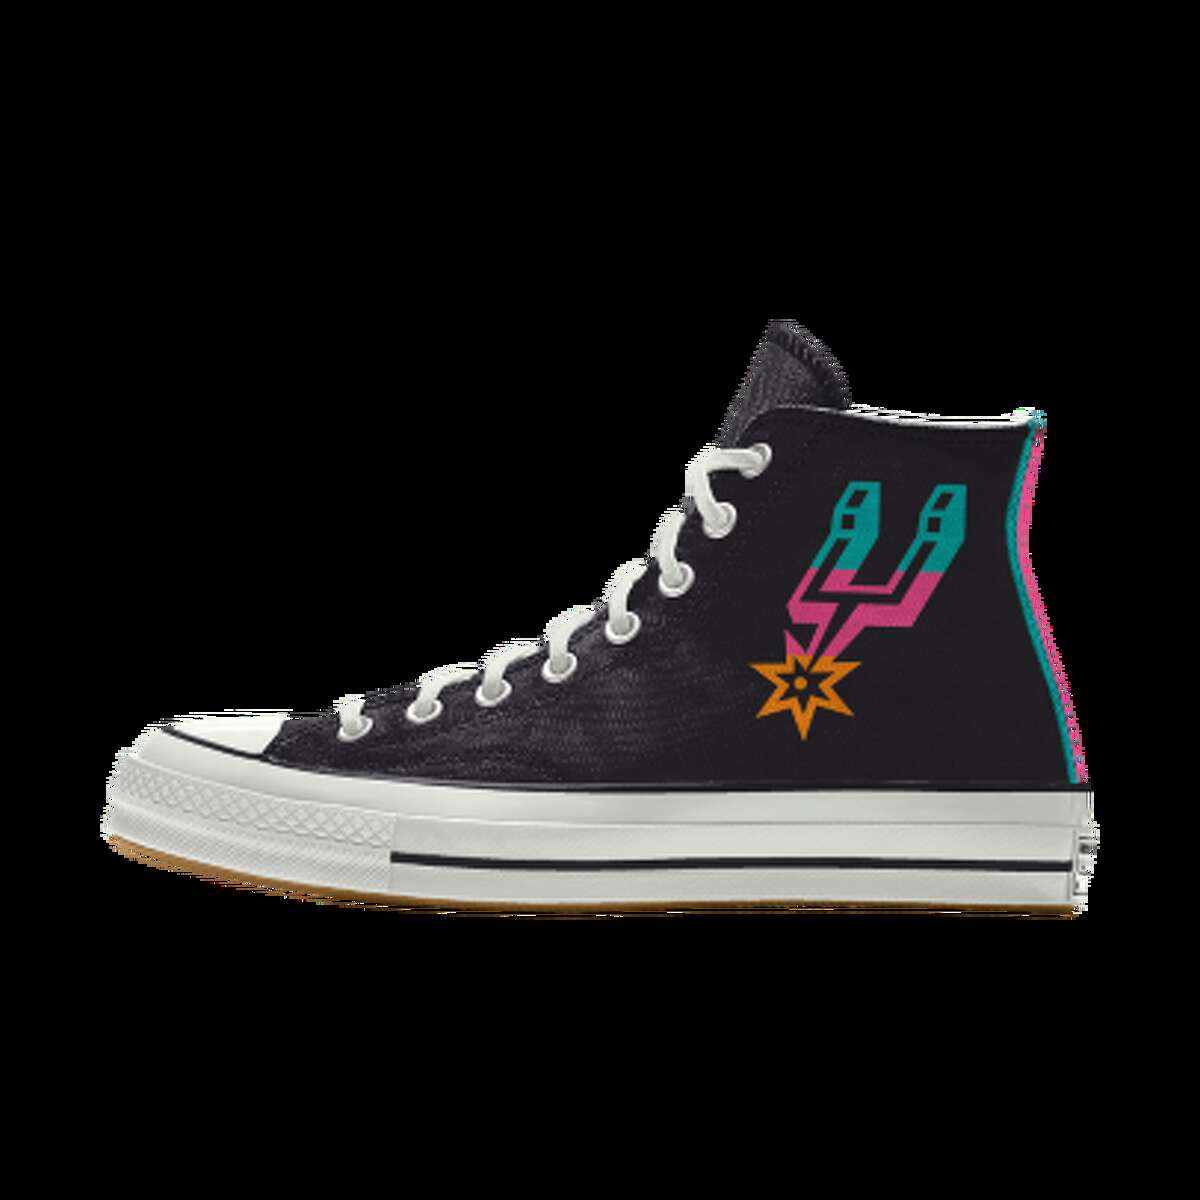 Antonio Spurs six NBA franchises with these customizable Converse